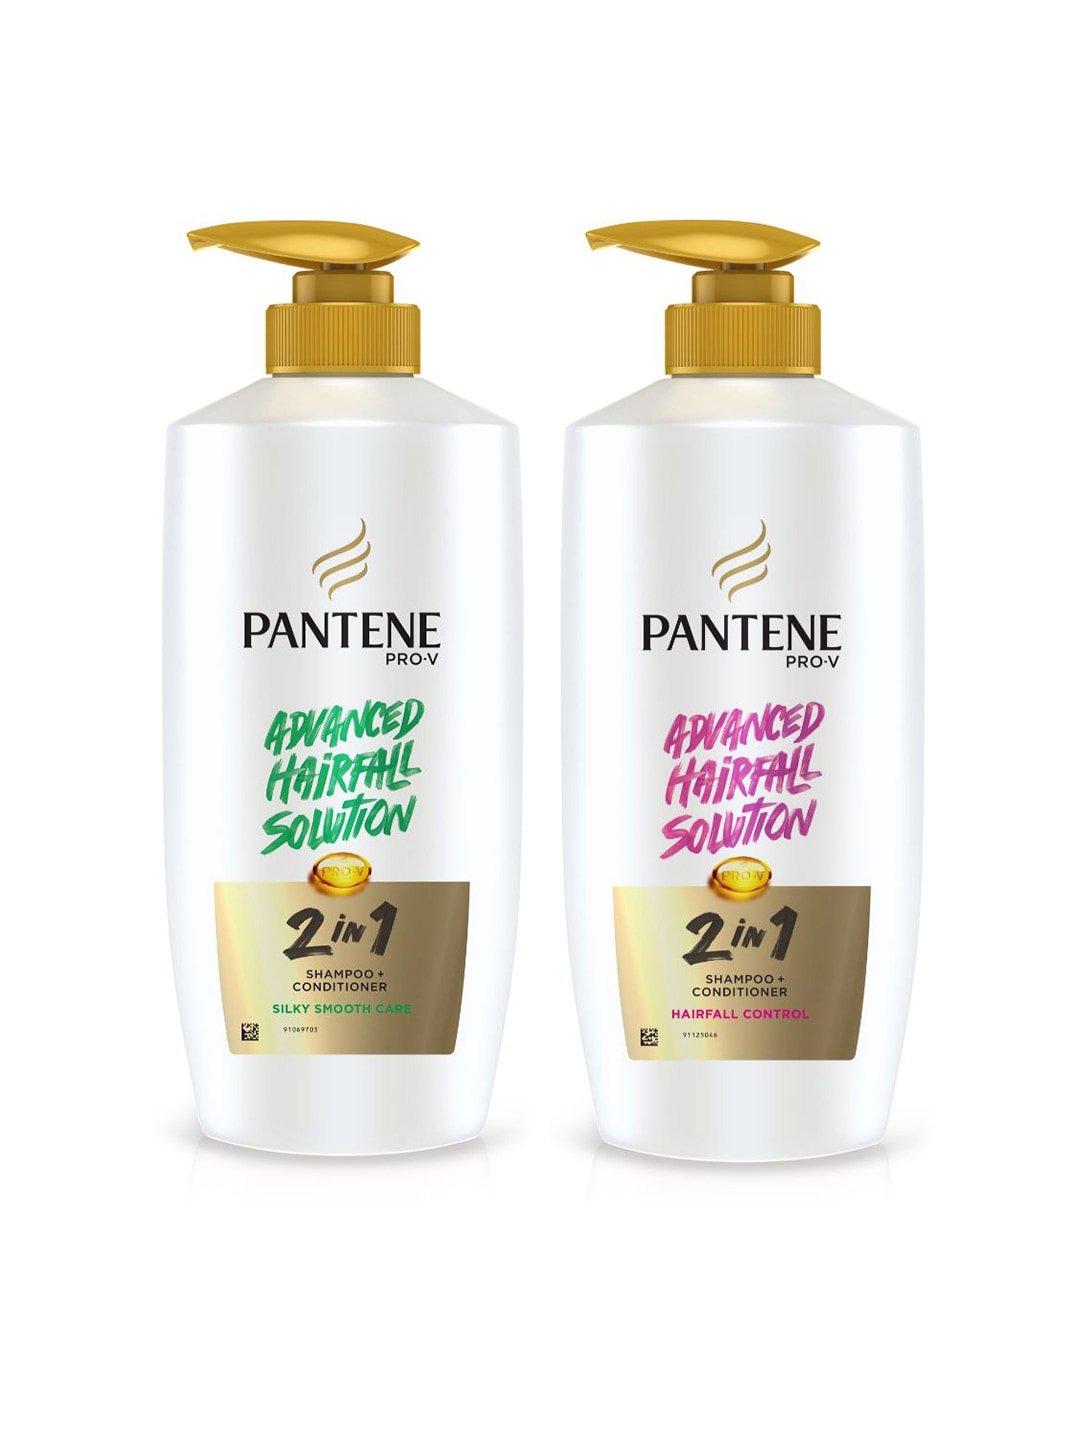 Pantene Set of 2  Advanced Hair Fall Solution 2 in 1 Shampoo + Conditioner Price in India